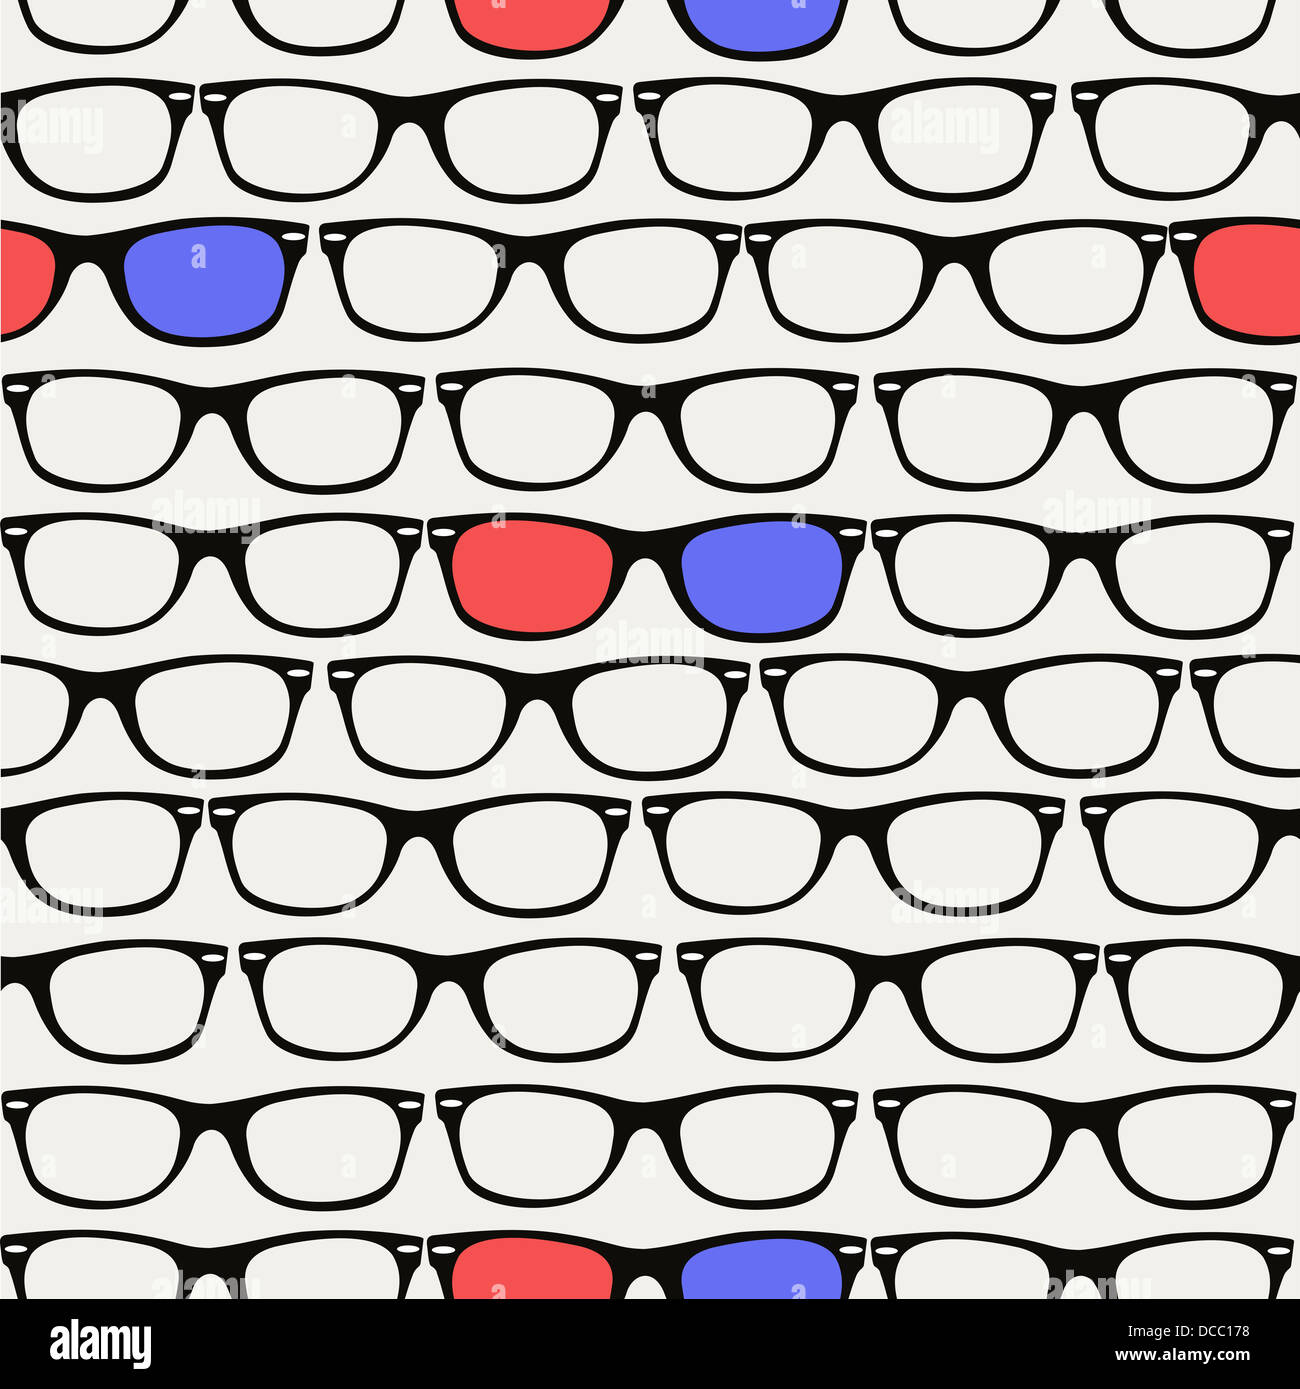 Vintage 3D glasses seamless pattern background. Vector file layered for easy editing. Stock Photo